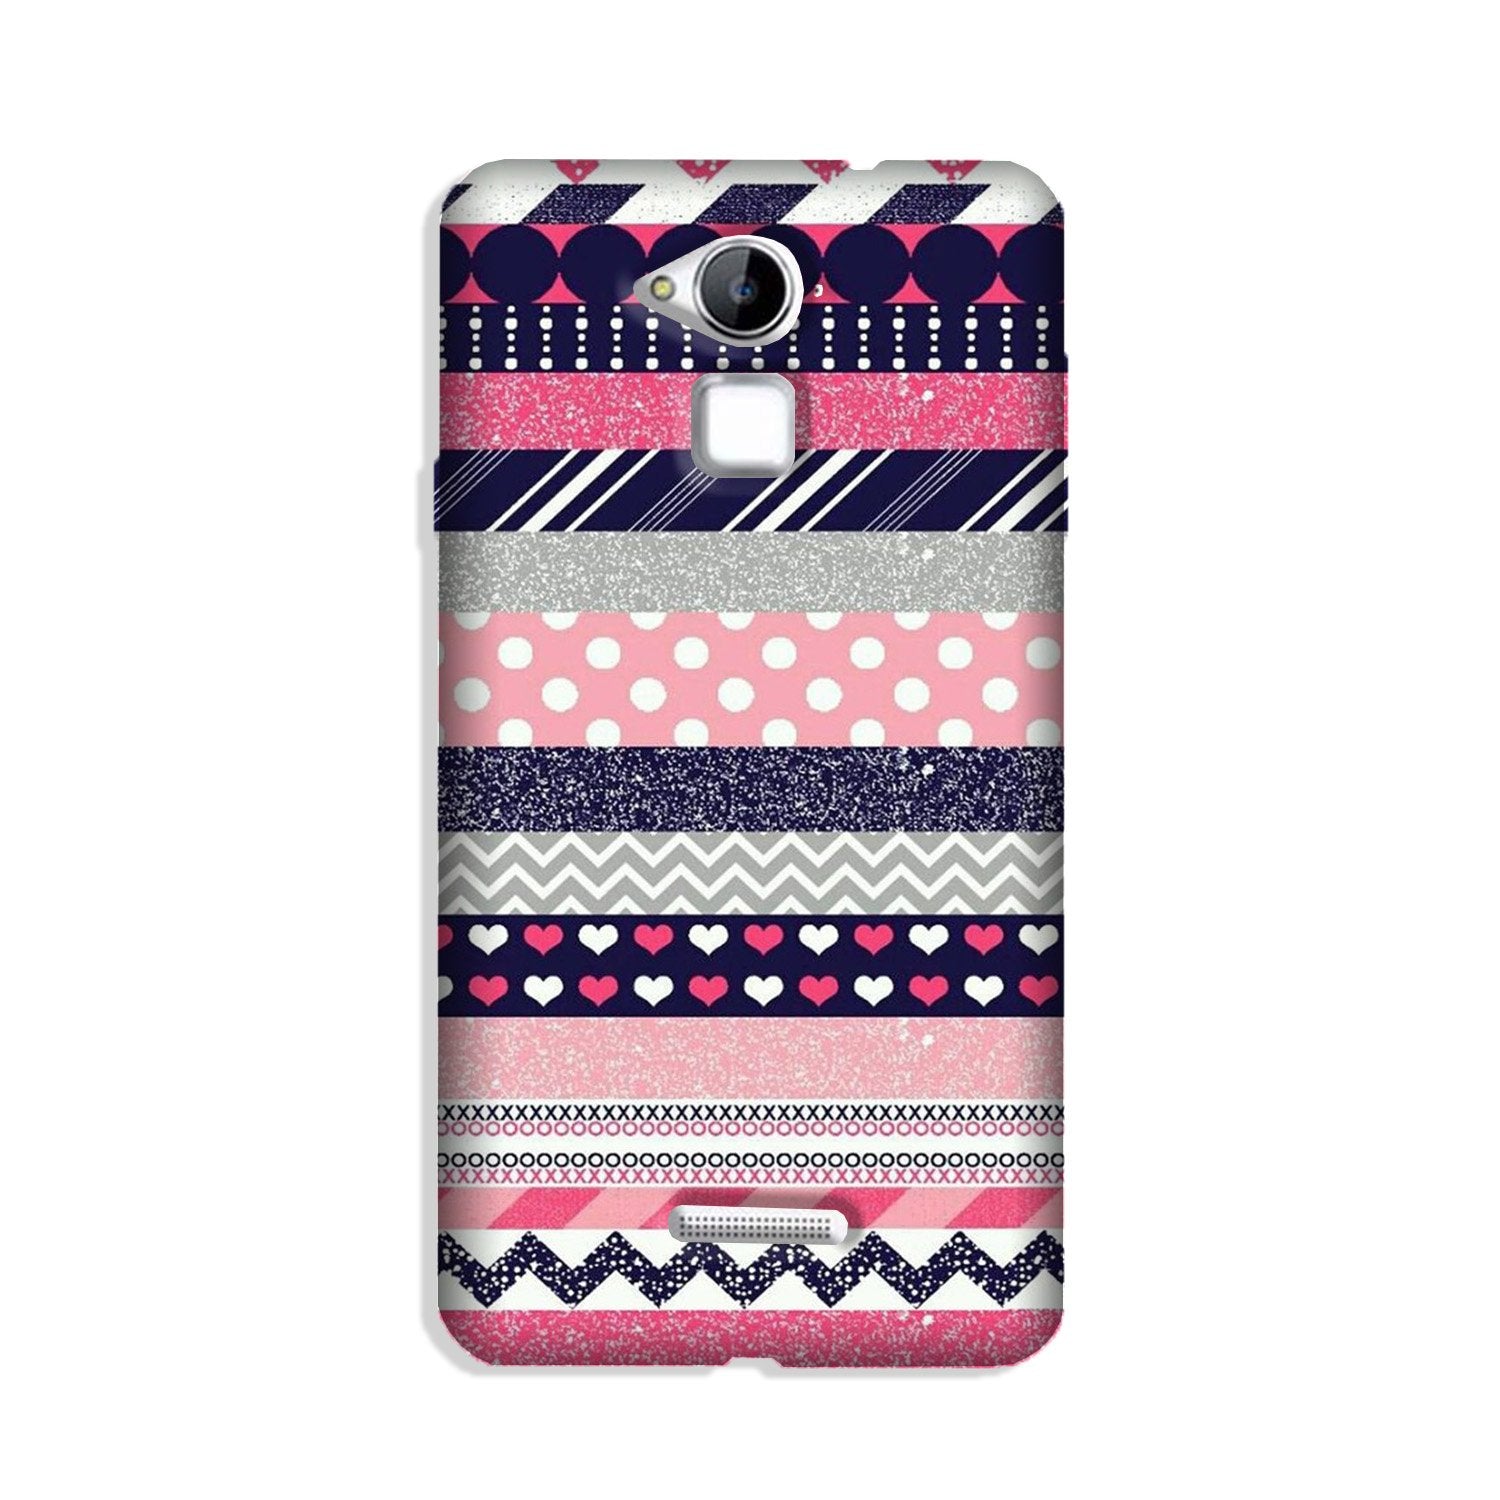 Pattern Case for Coolpad Note 3